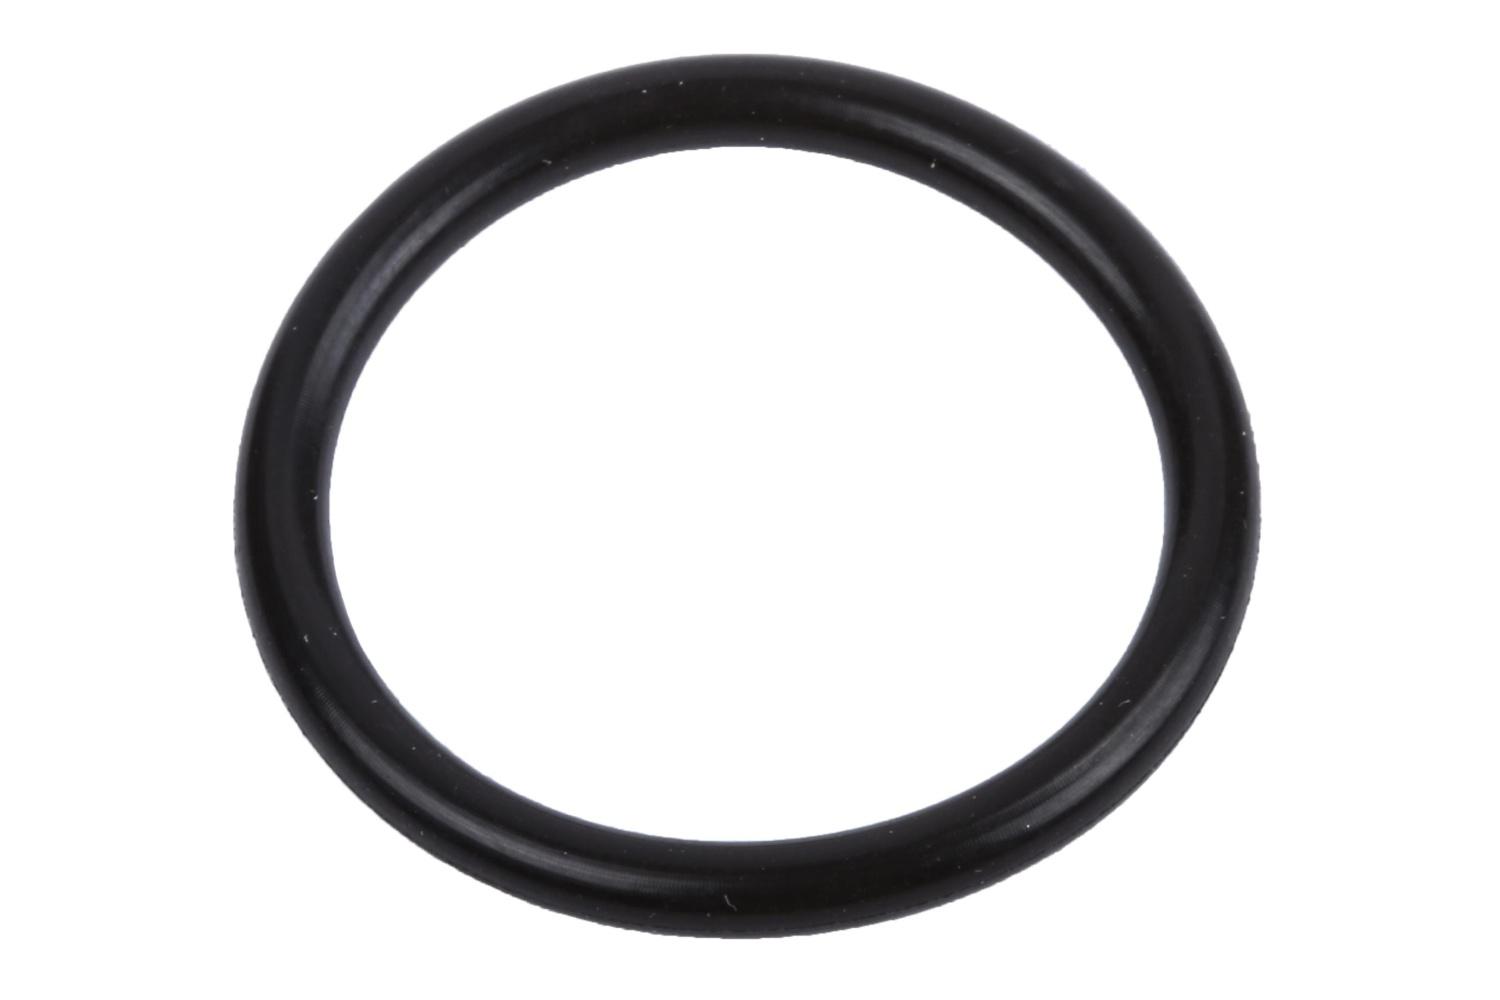 GM GENUINE PARTS - Engine Water Pump Inlet Pipe O-Ring - GMP 55570238